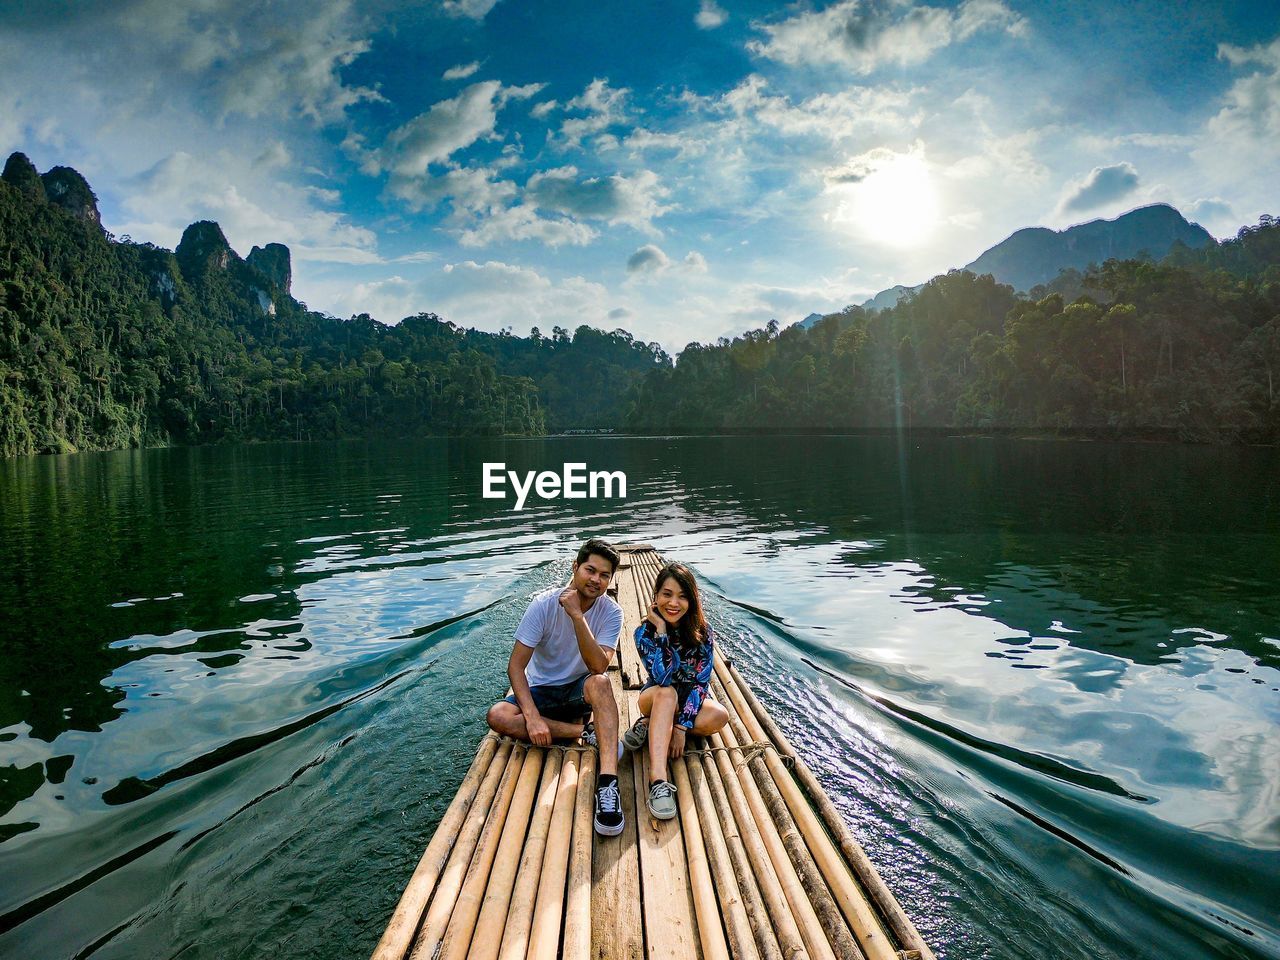 Couple sitting on wooden raft in lake against trees